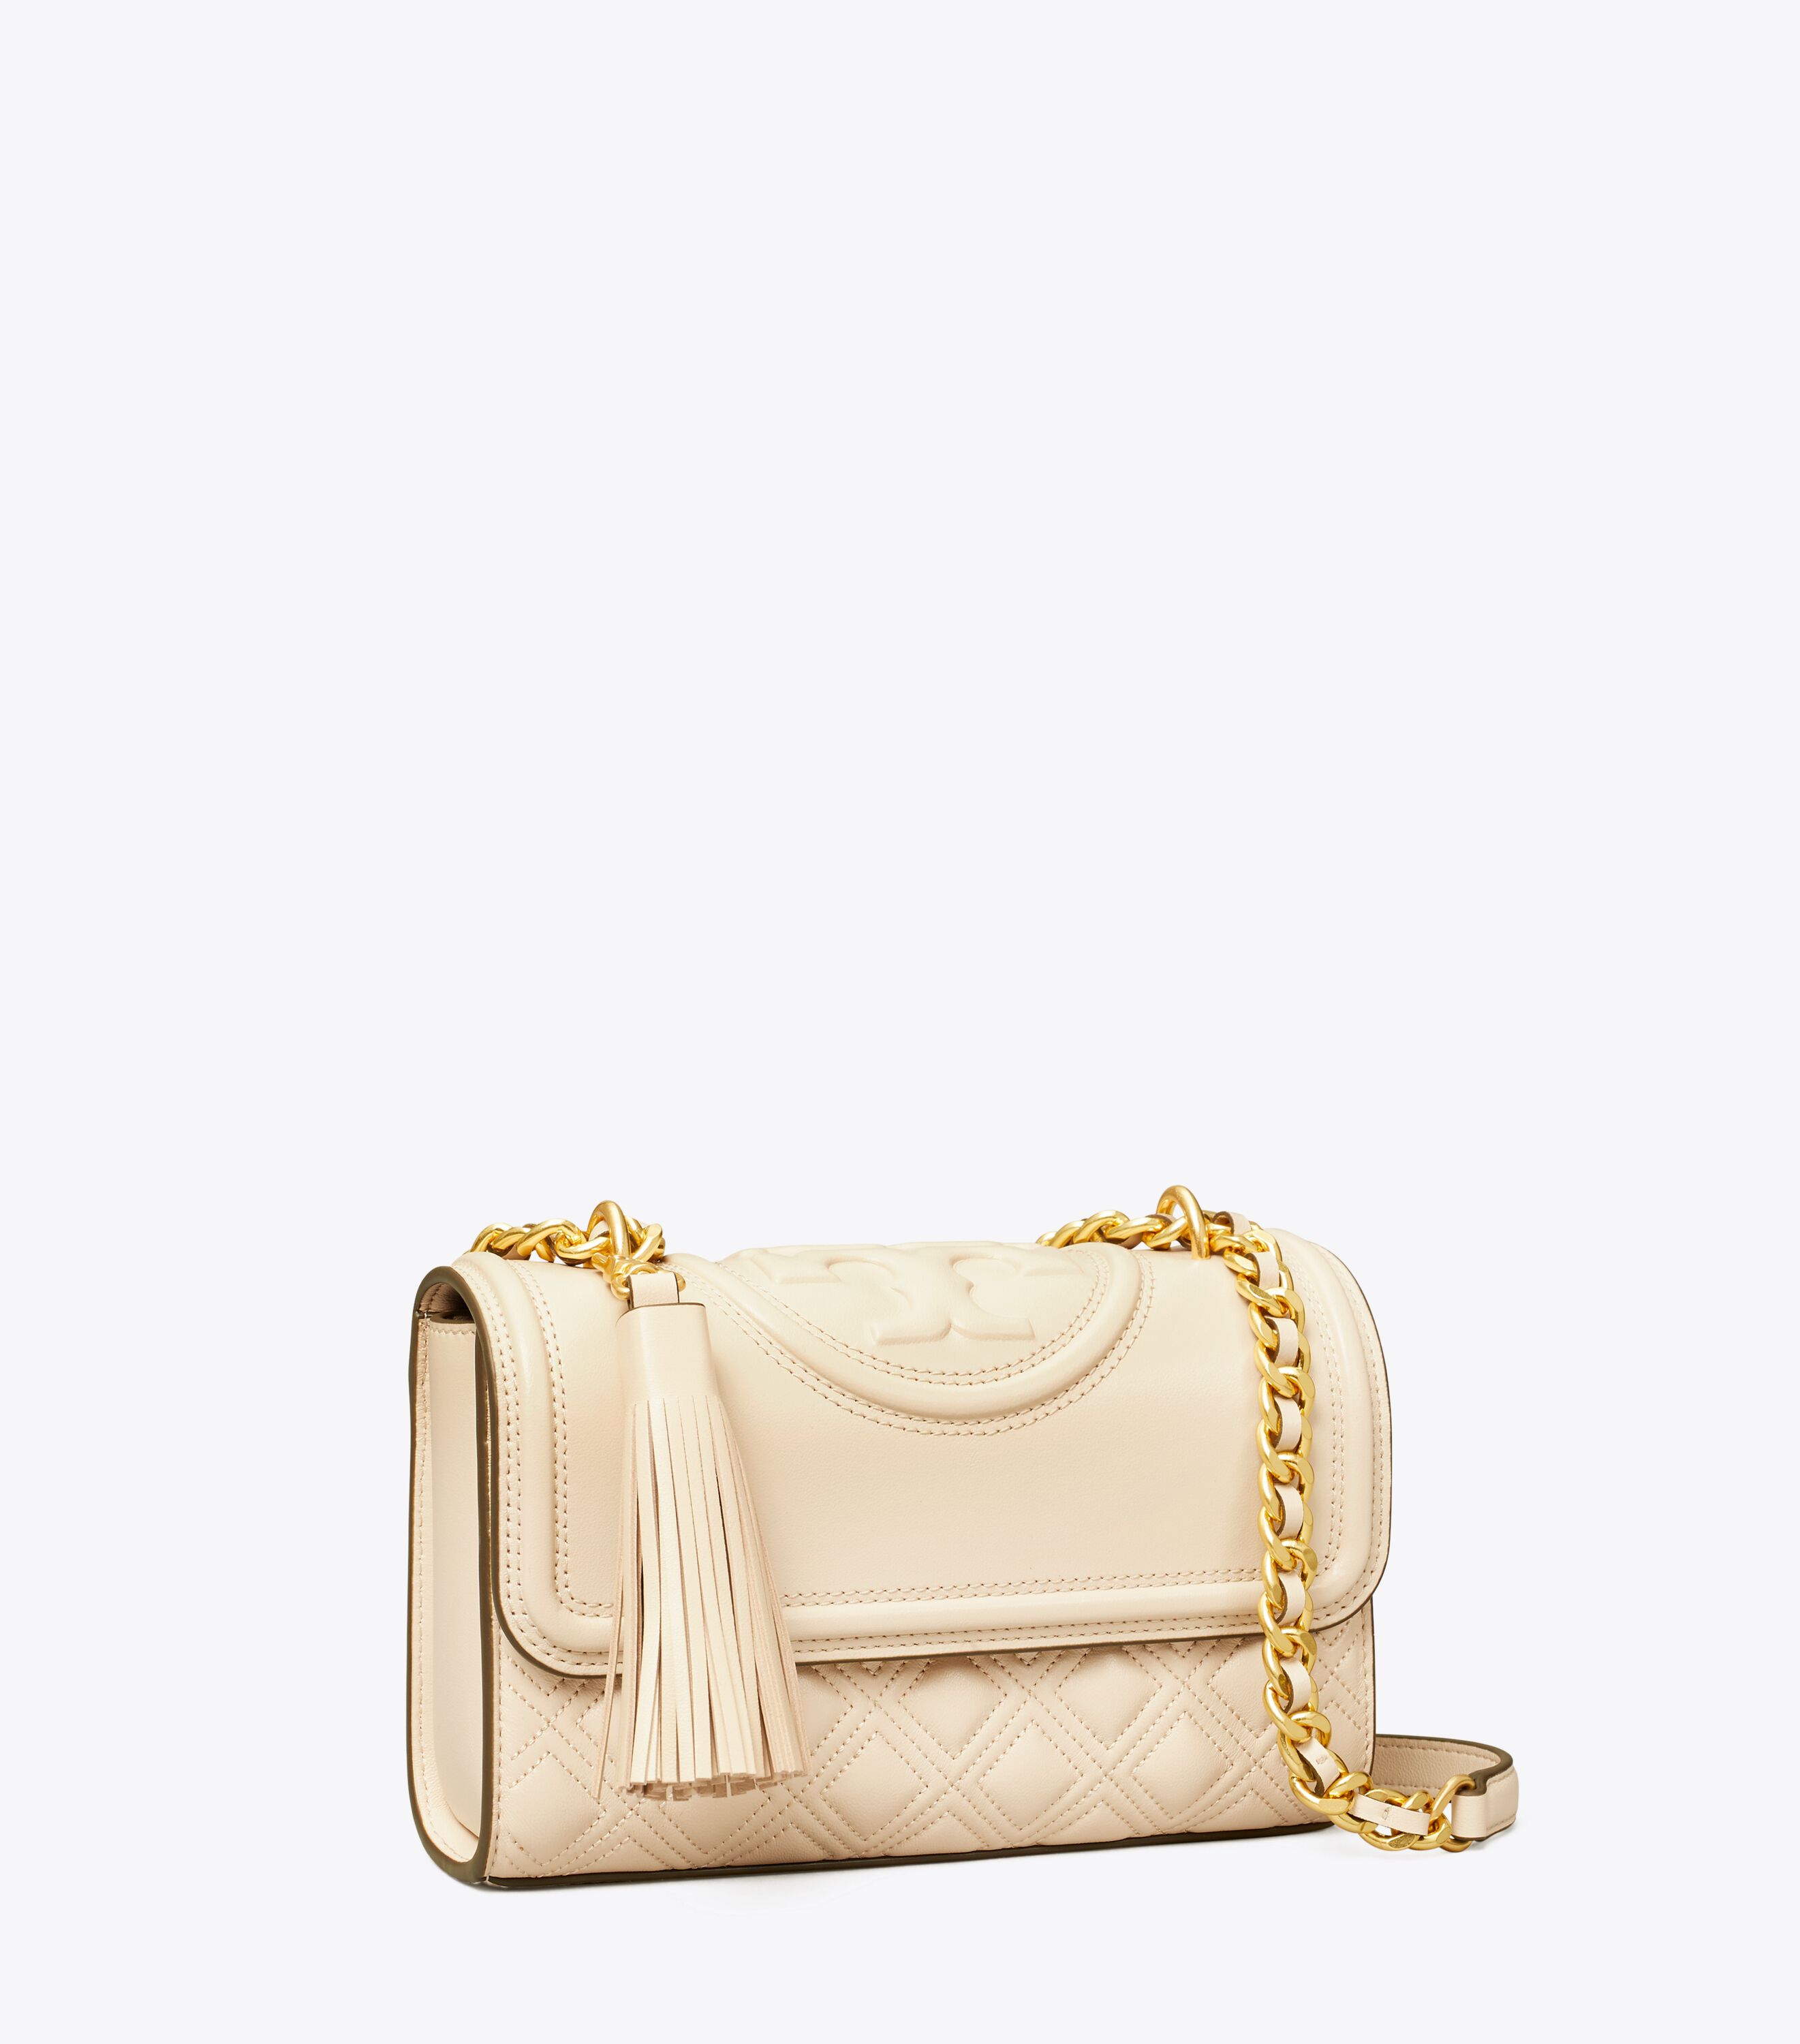 The Fleming Collection Designer Handbags | Tory Burch